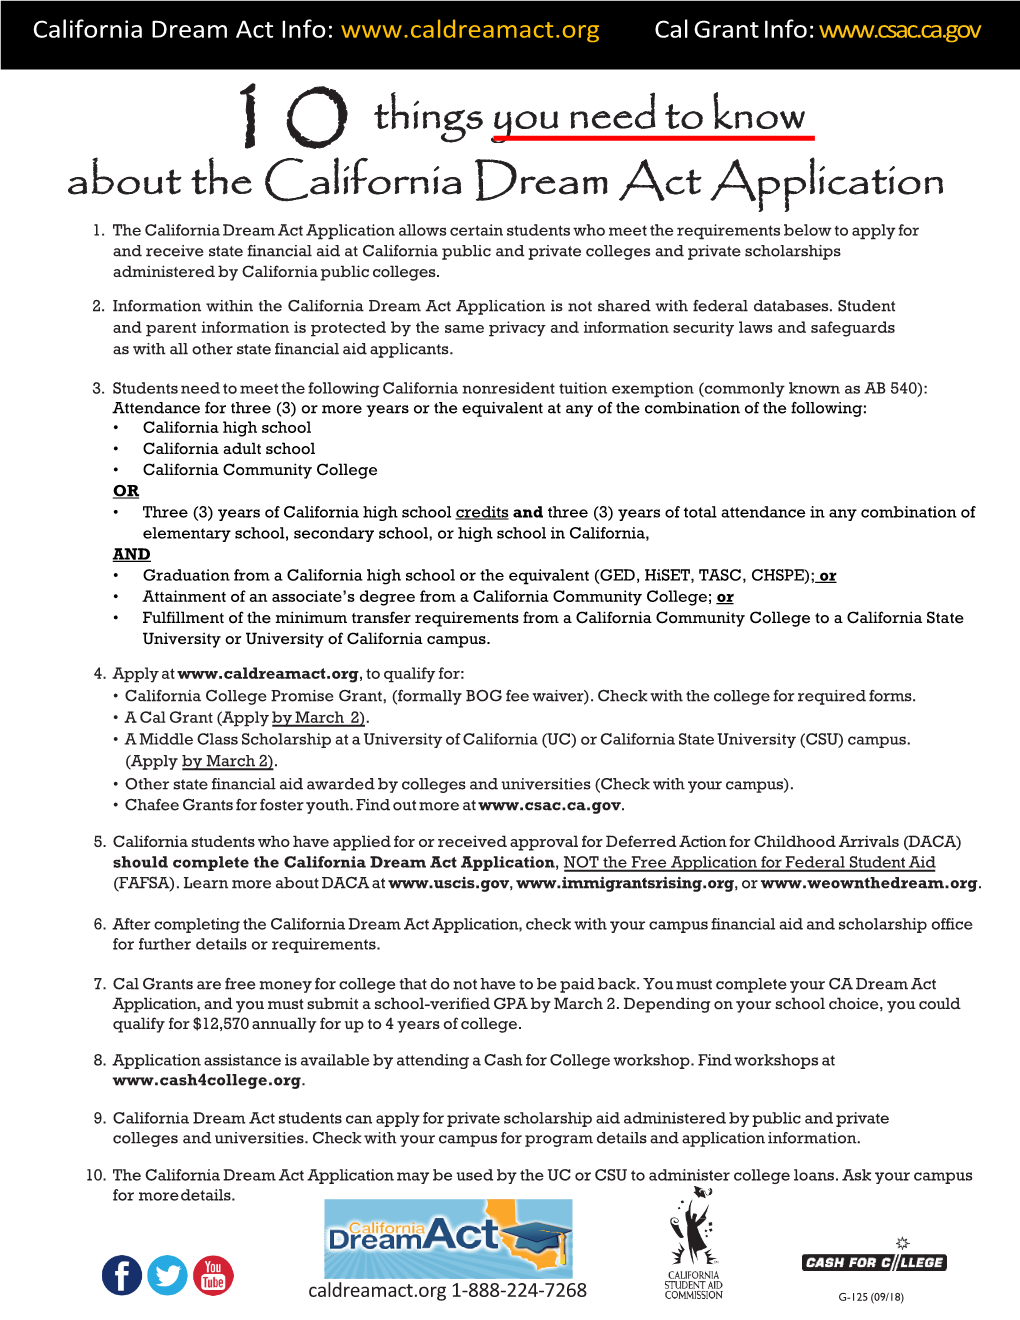 Things You Need to Know About the California Dream Act Application